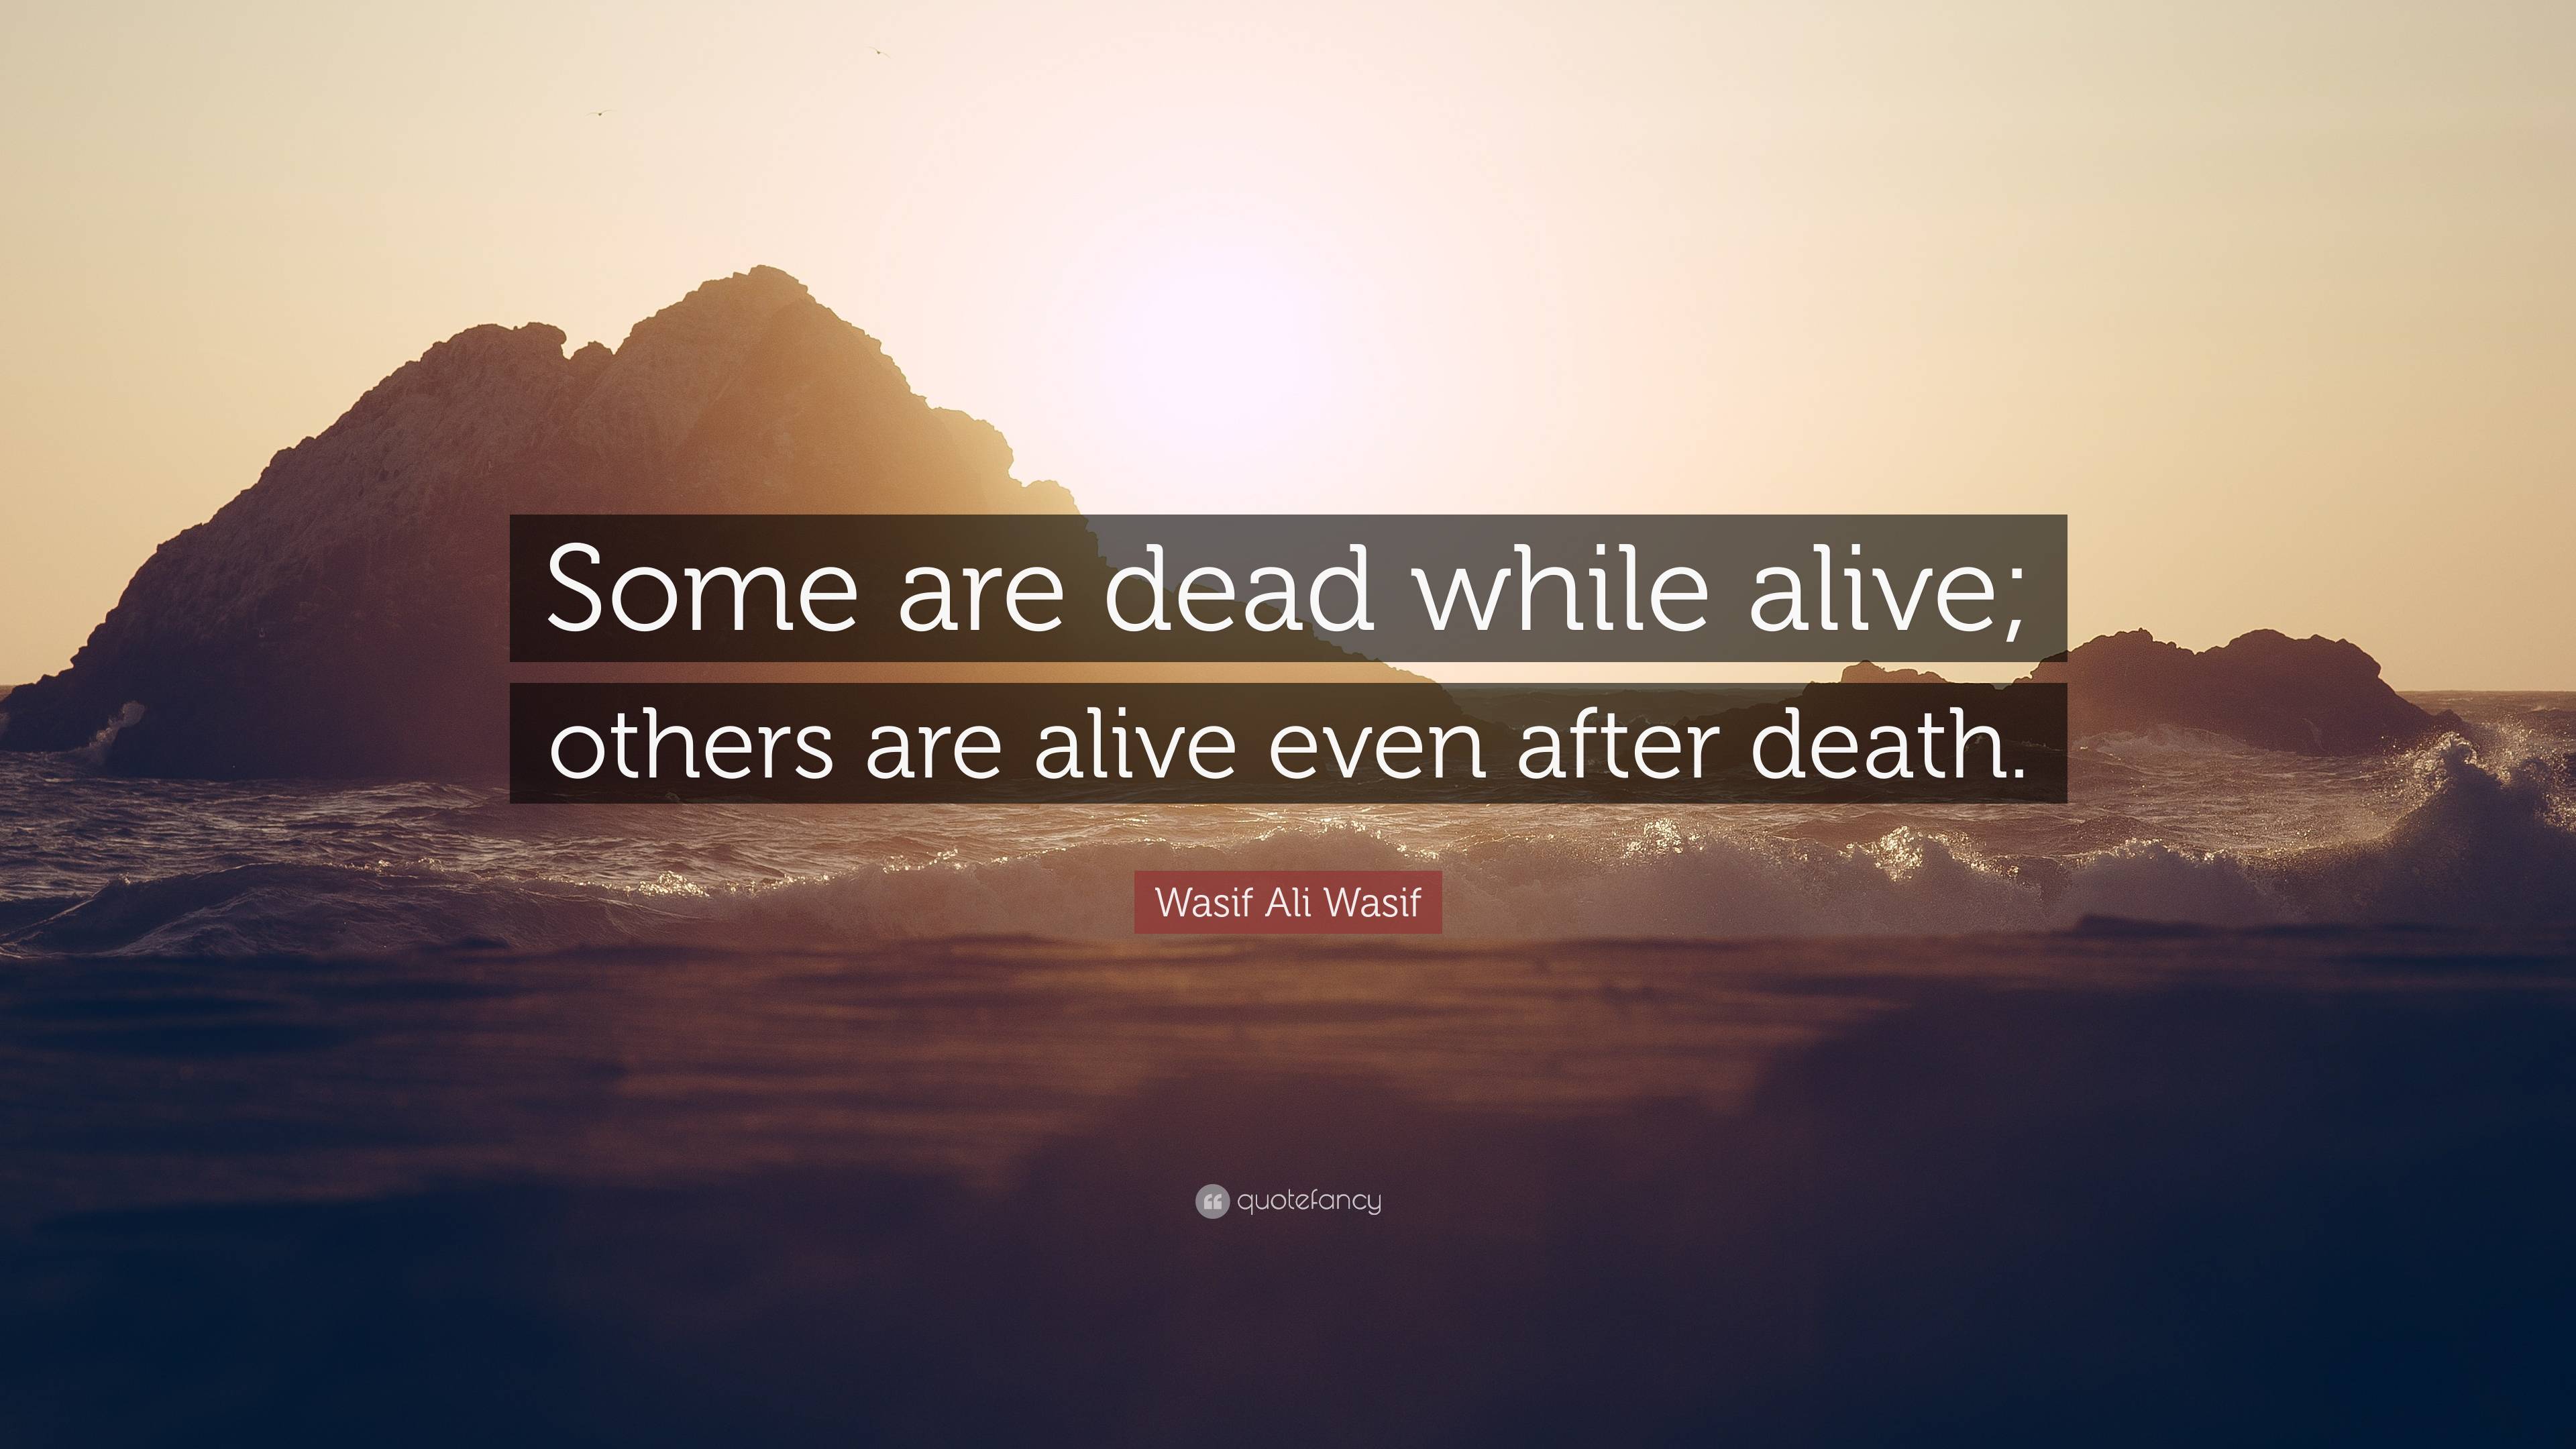 Even After Death